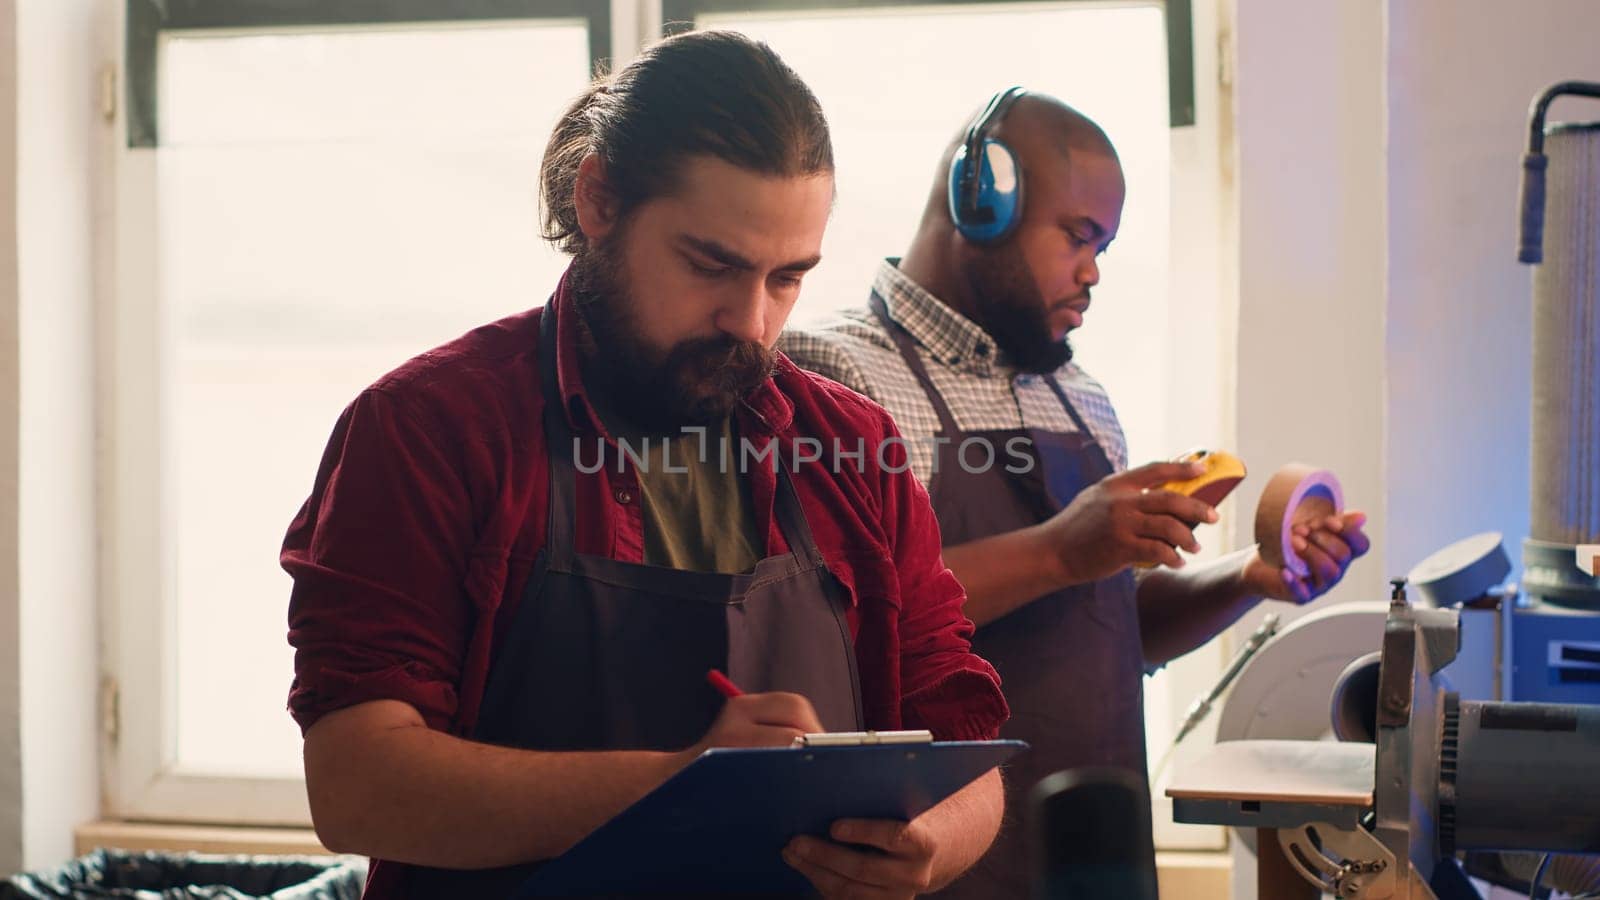 Craftsperson drawing blueprints on notepad in studio with BIPOC coworker in background solving tasks. Manufacturer looking at technical schematics to execute woodworking projects, camera A